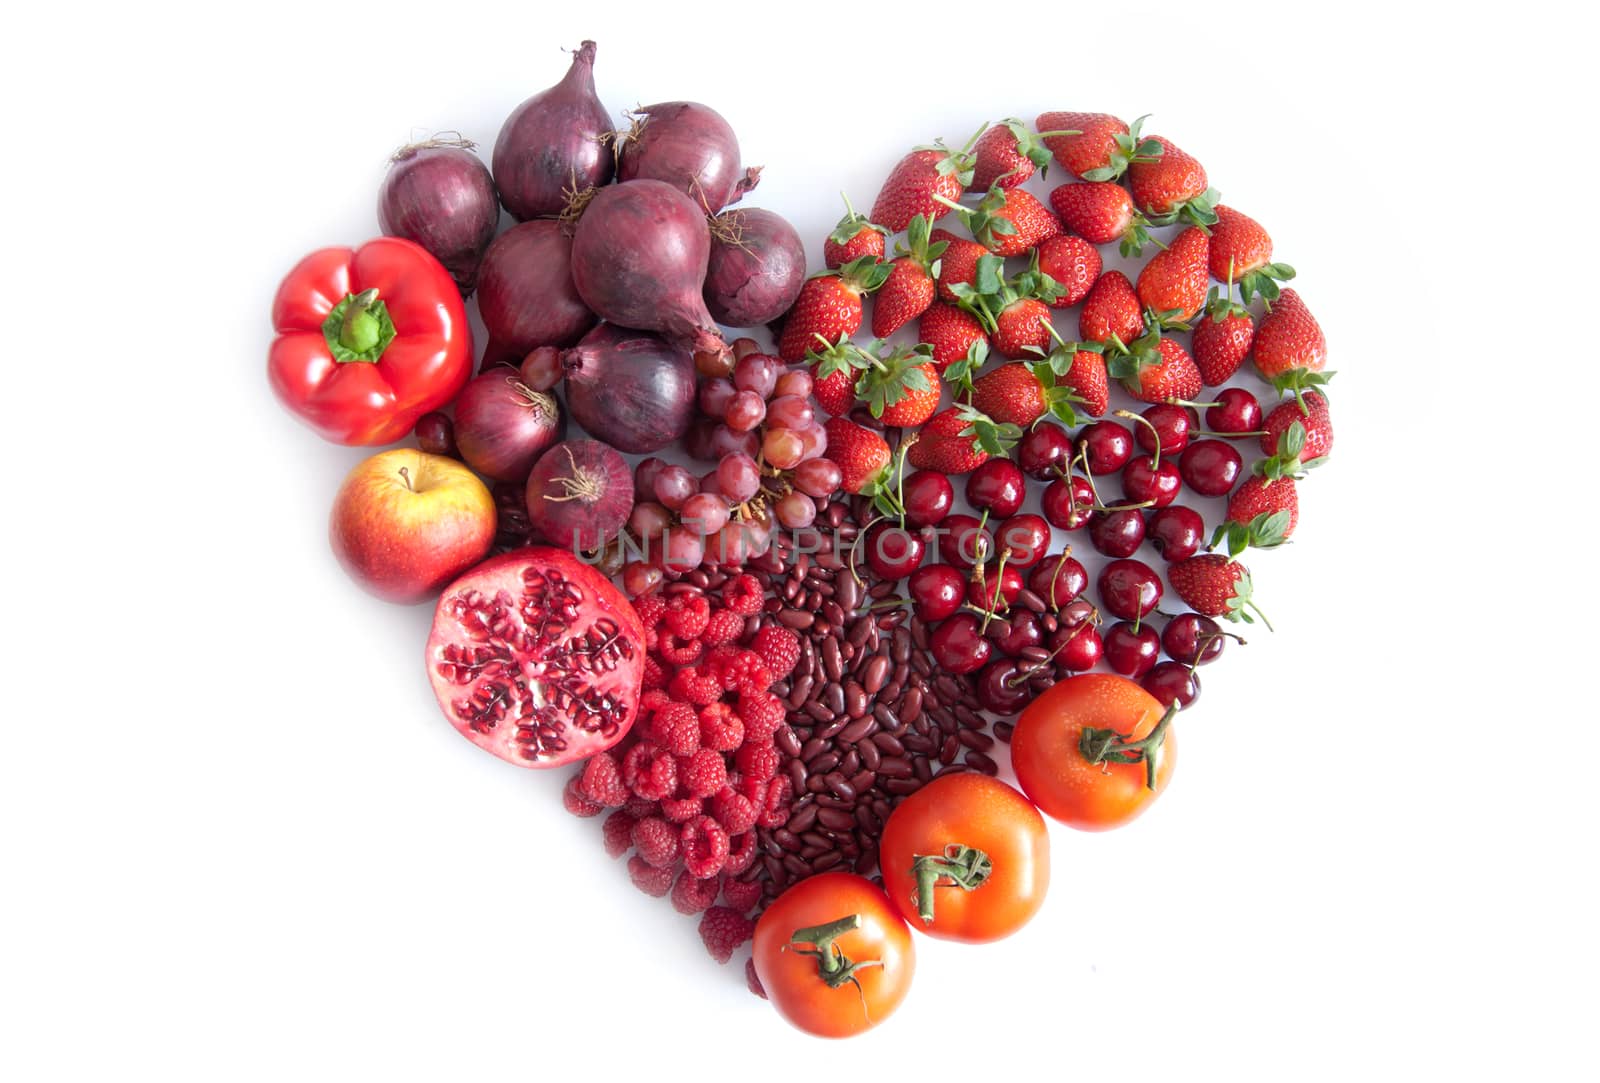 Red fruits, vegetables and pulses in the shape of a heart